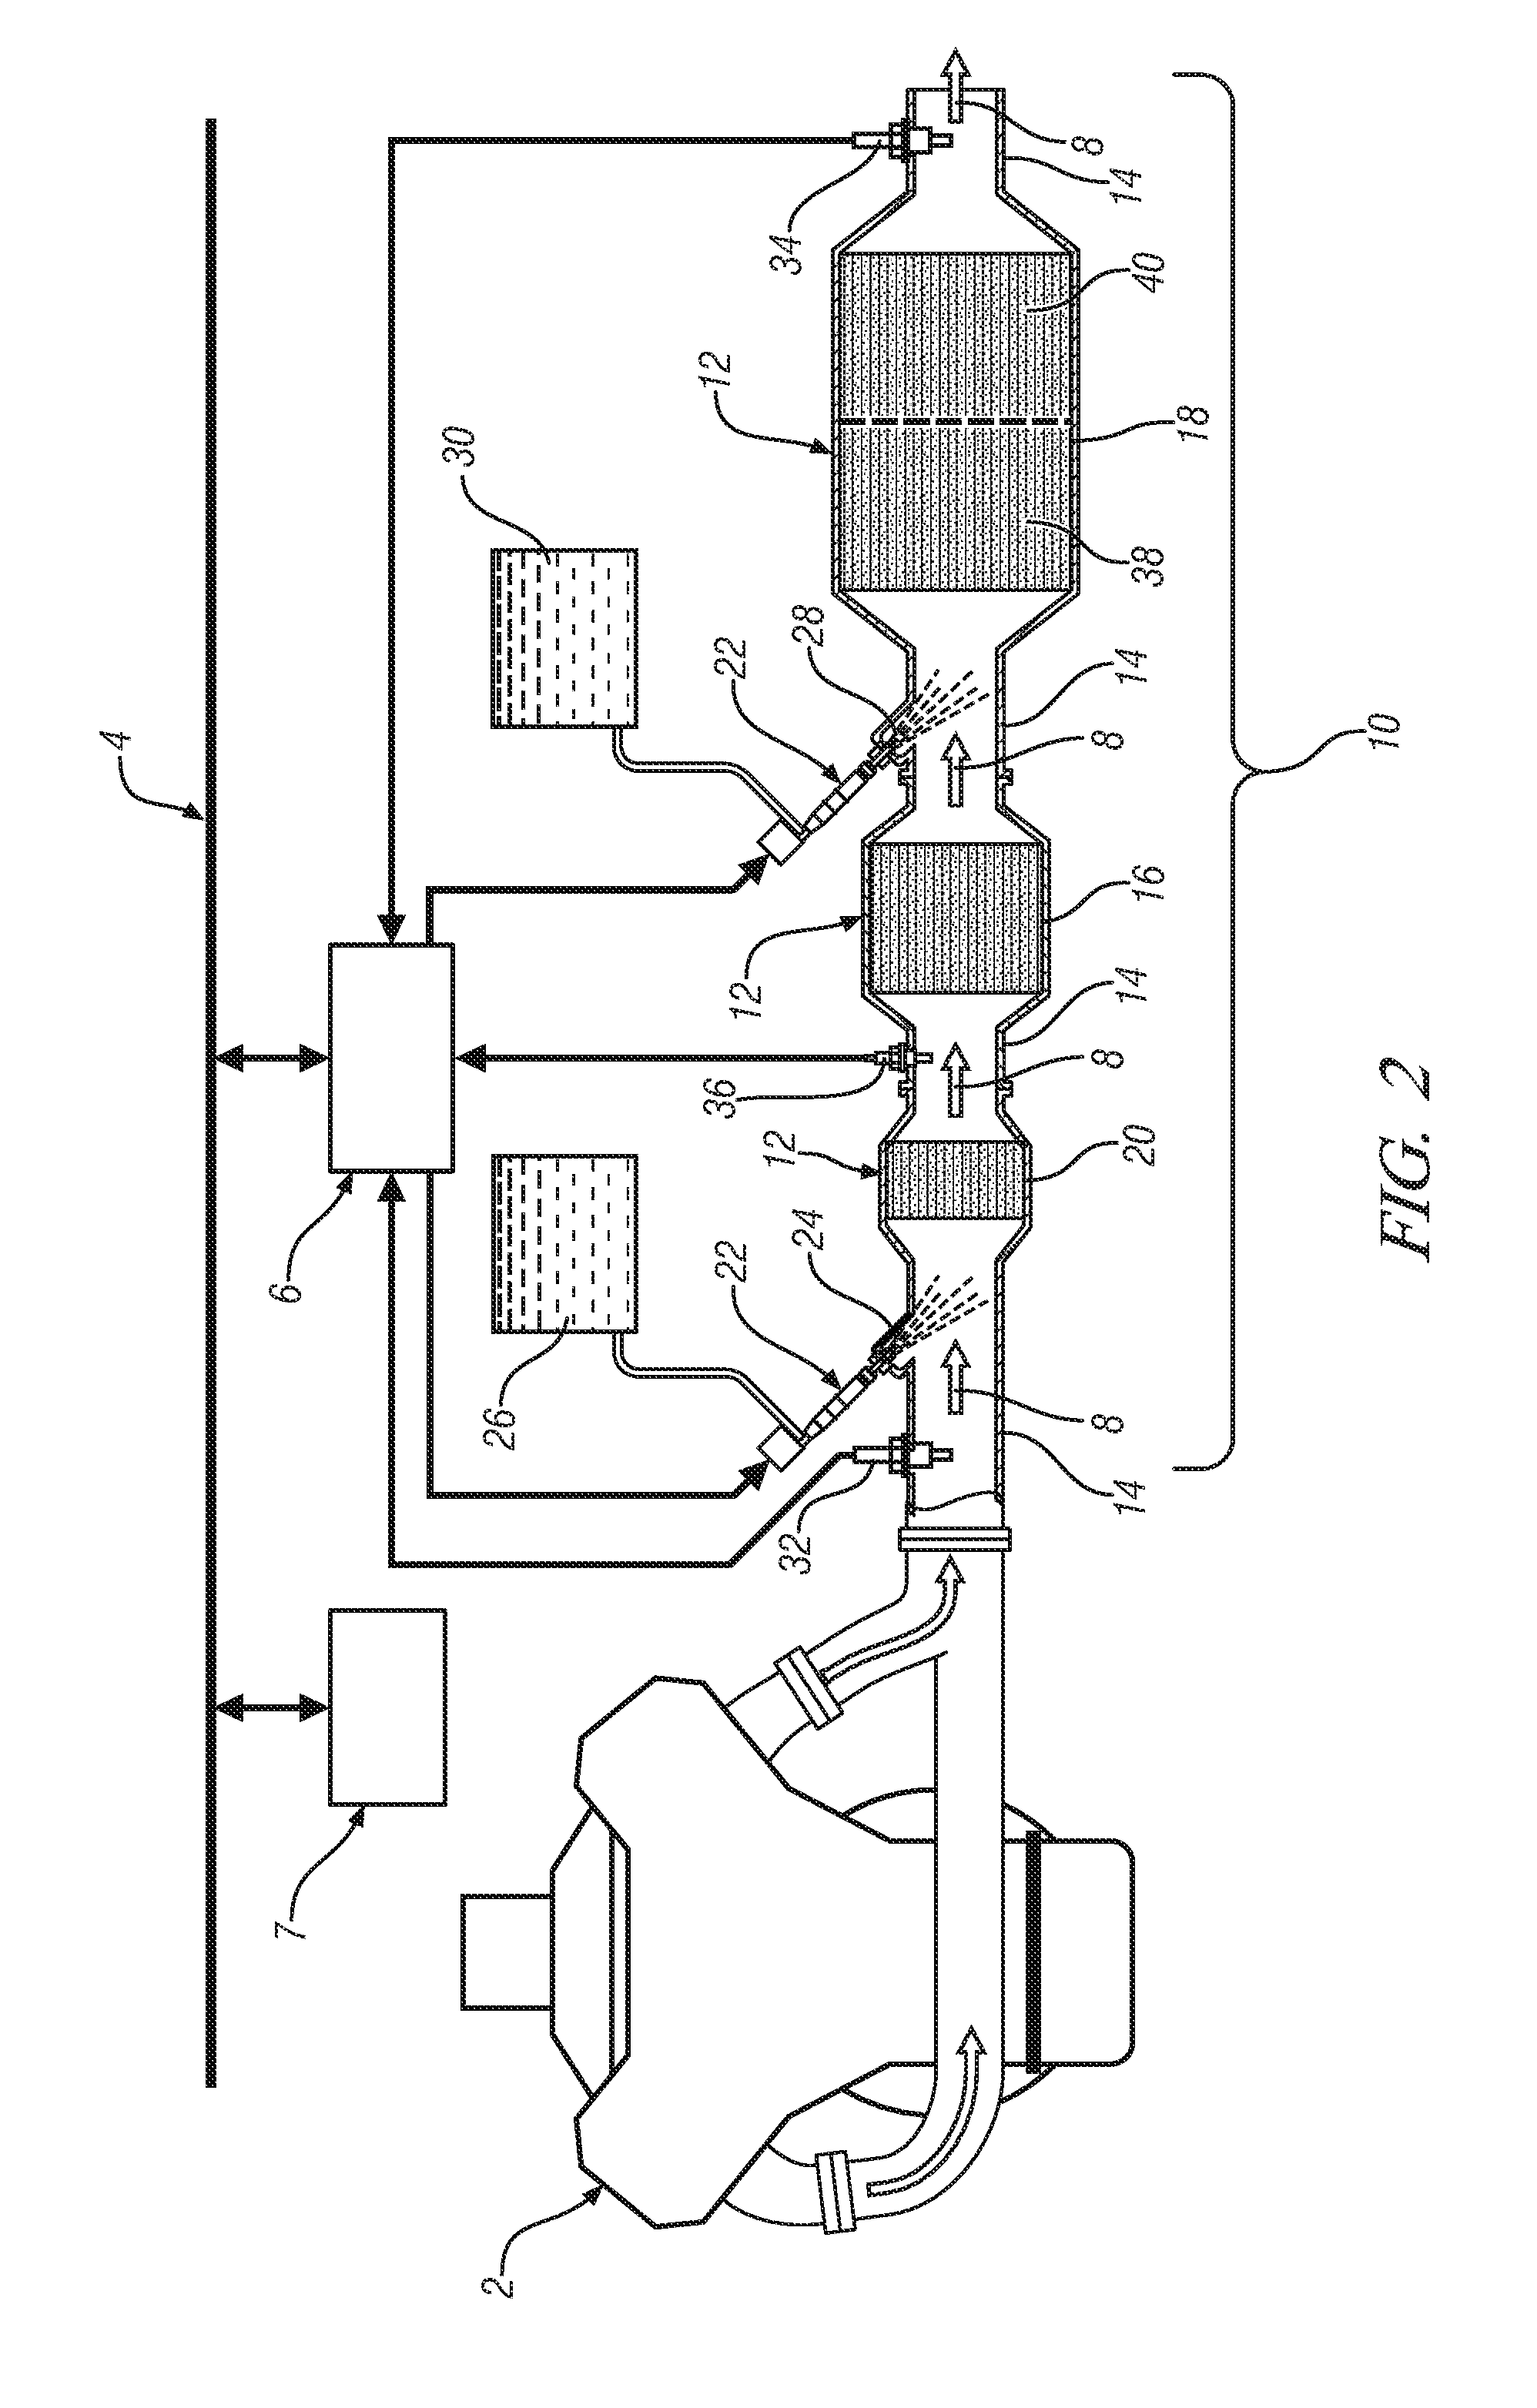 Exhaust Gas Treatment System Including an HC-SCR and Two-way Catalyst and Method of Using the Same